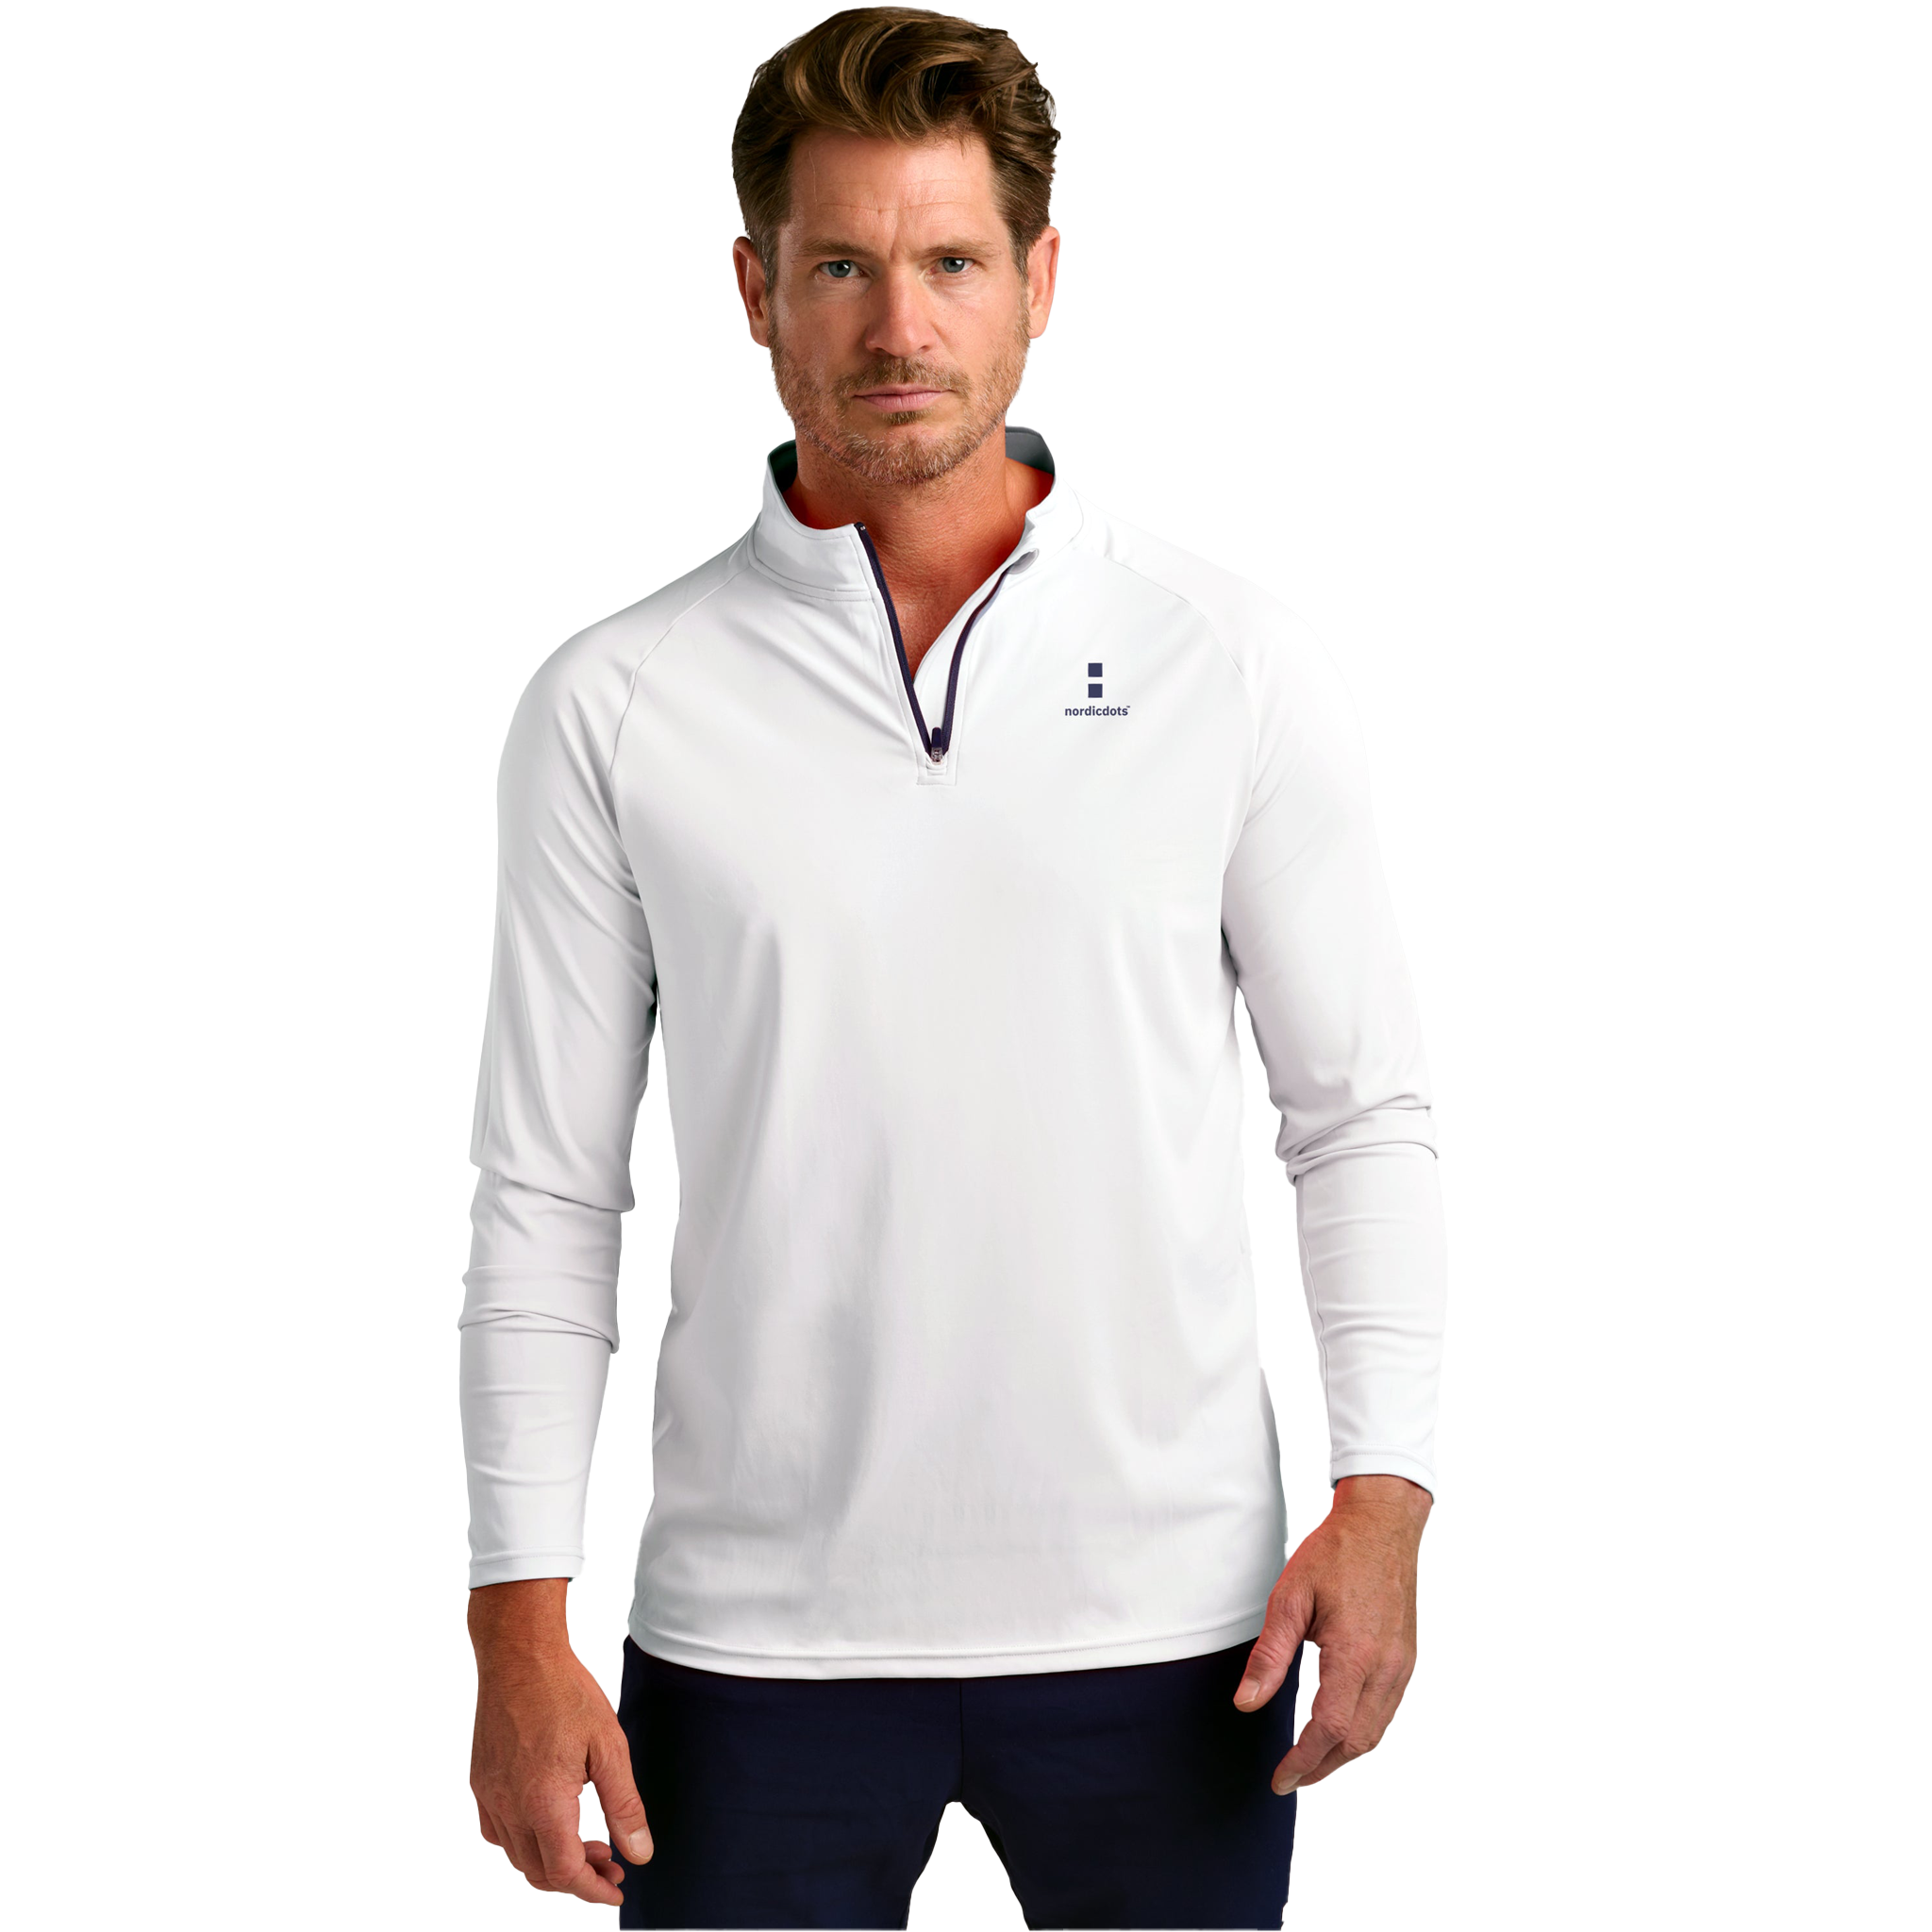 nordicdots Performance Long Sleeve White